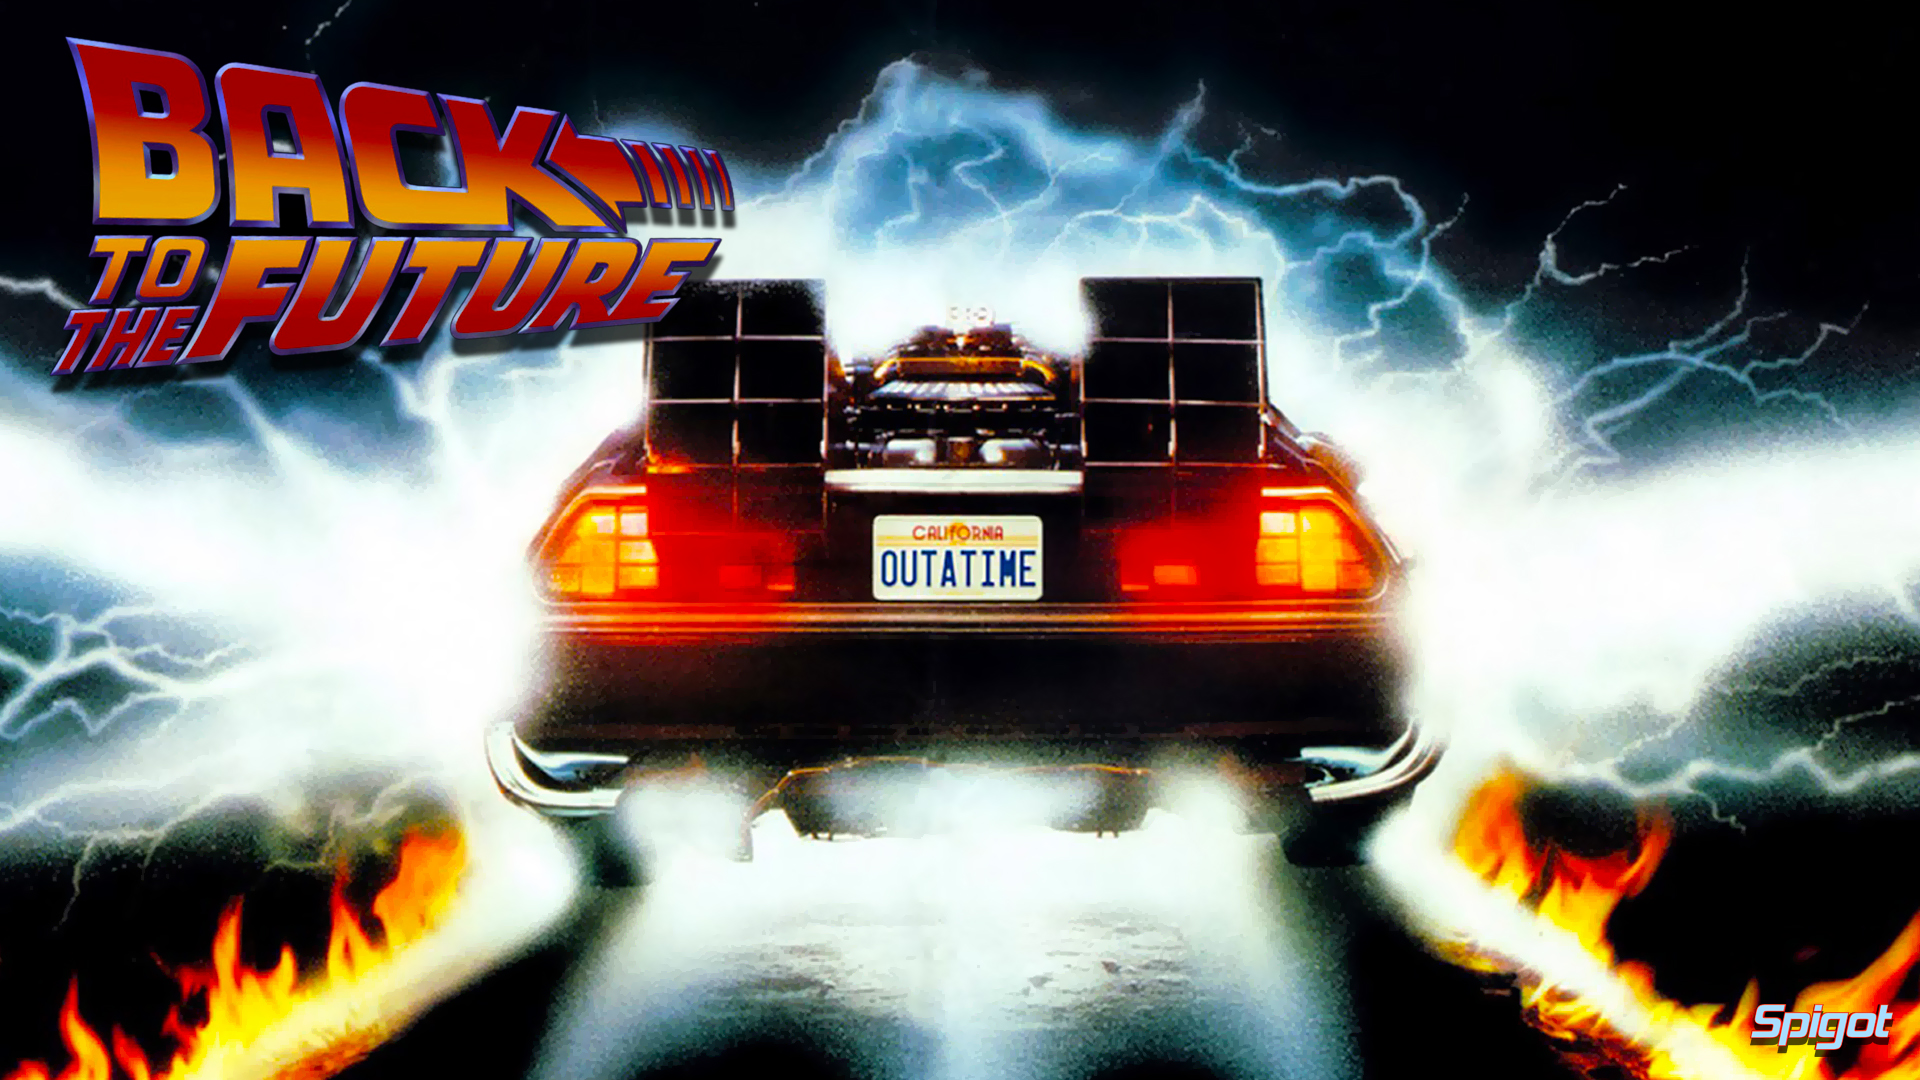 Back To The Future. George Spigot's Blog